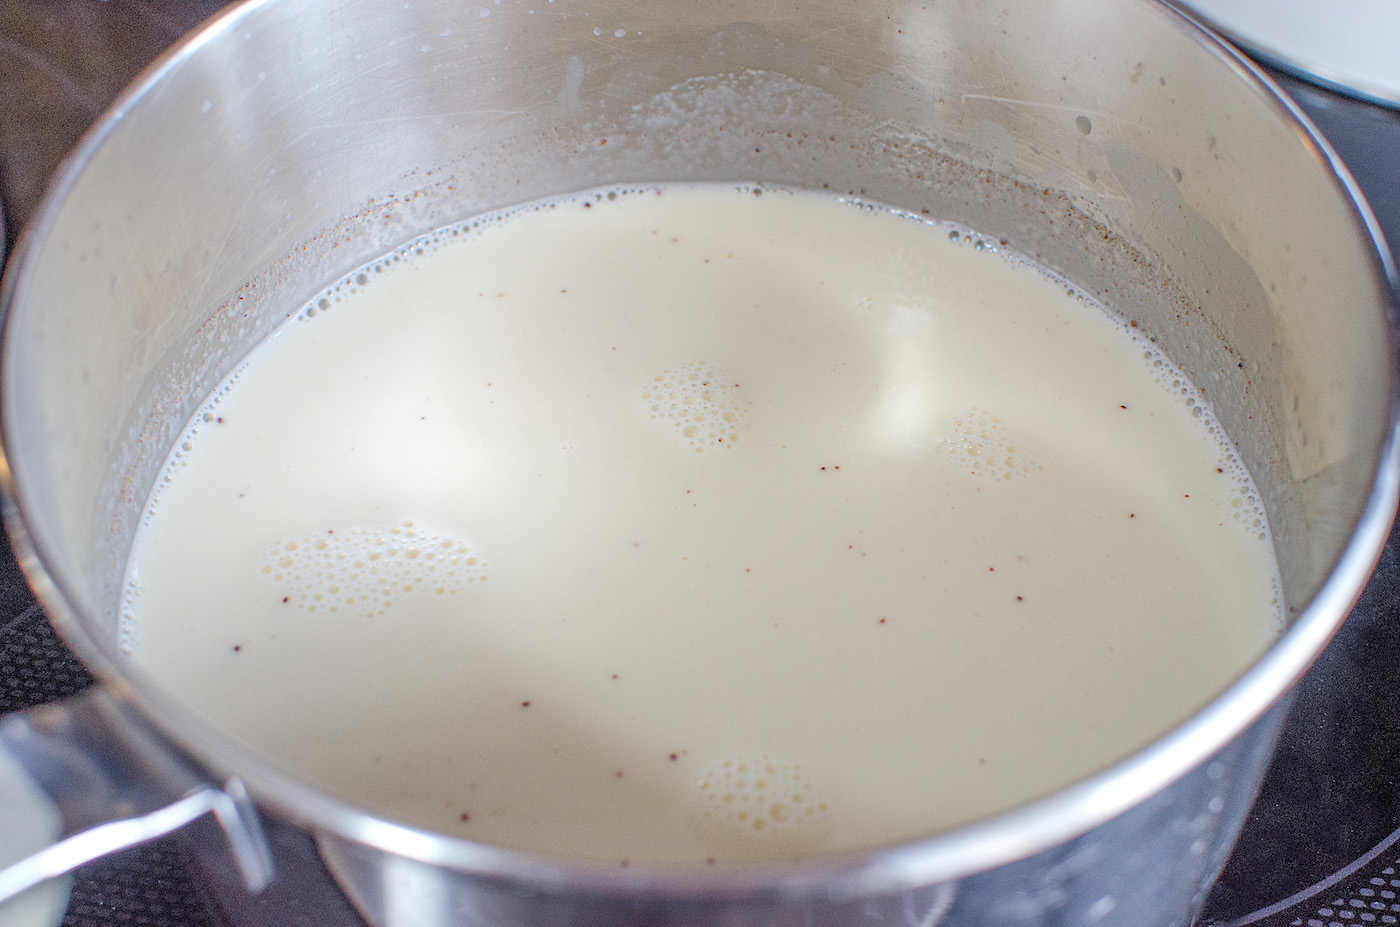 Whipping cream, eggnog, and half and half combined on the stove